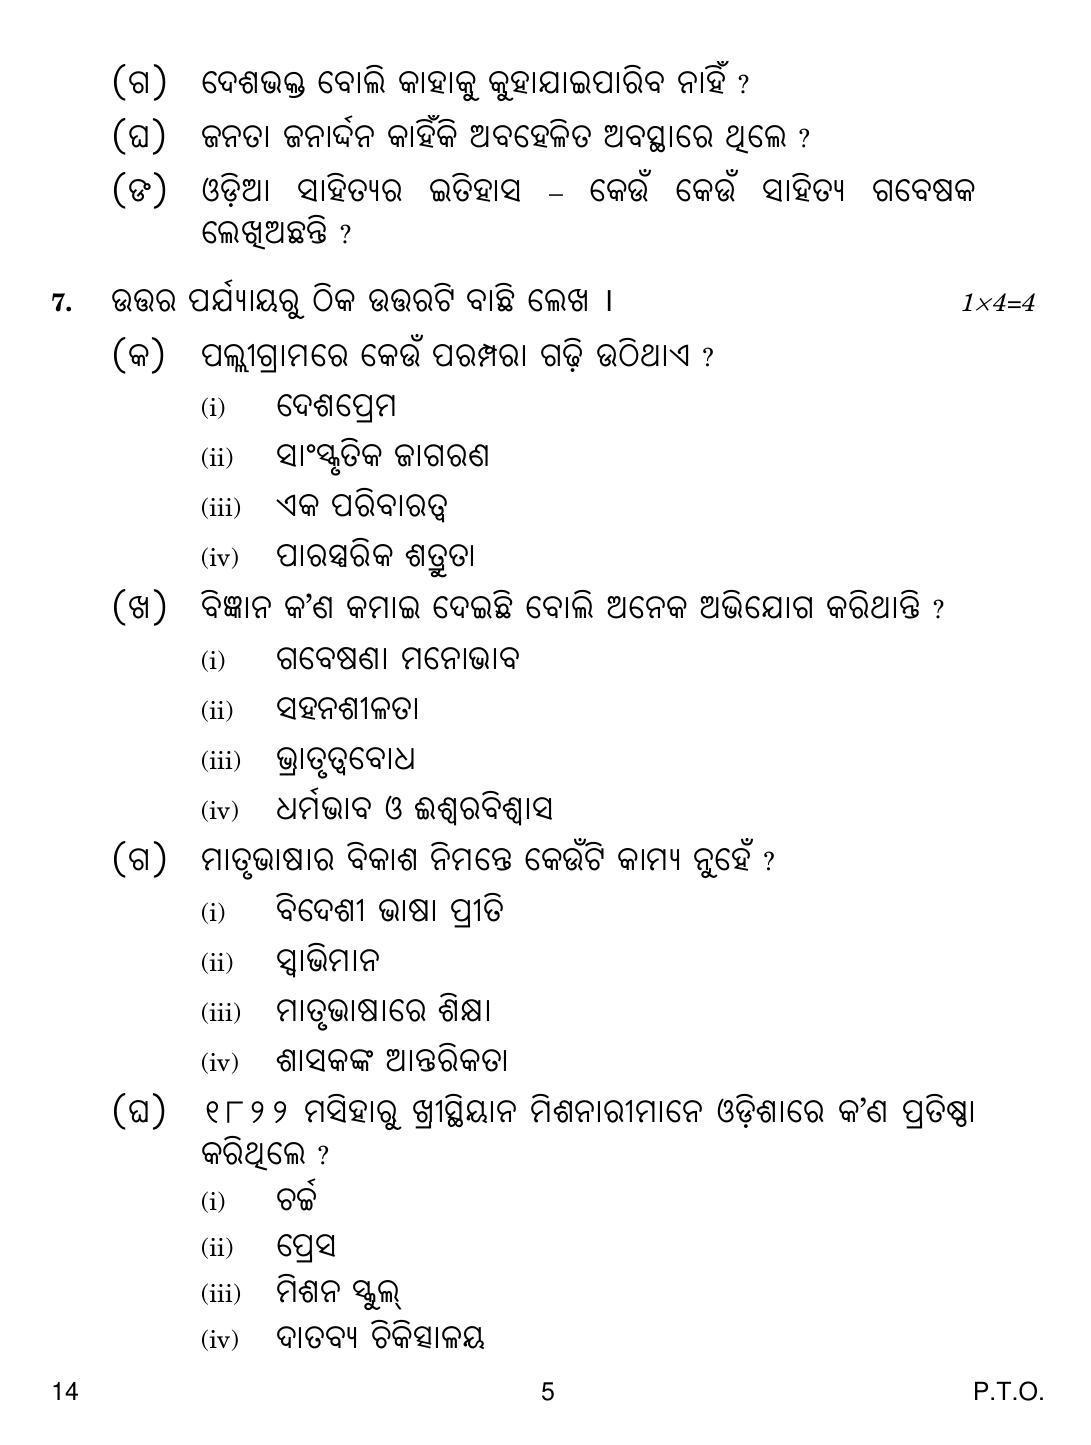 CBSE Class 10 14 Odia 2019 Question Paper - Page 5